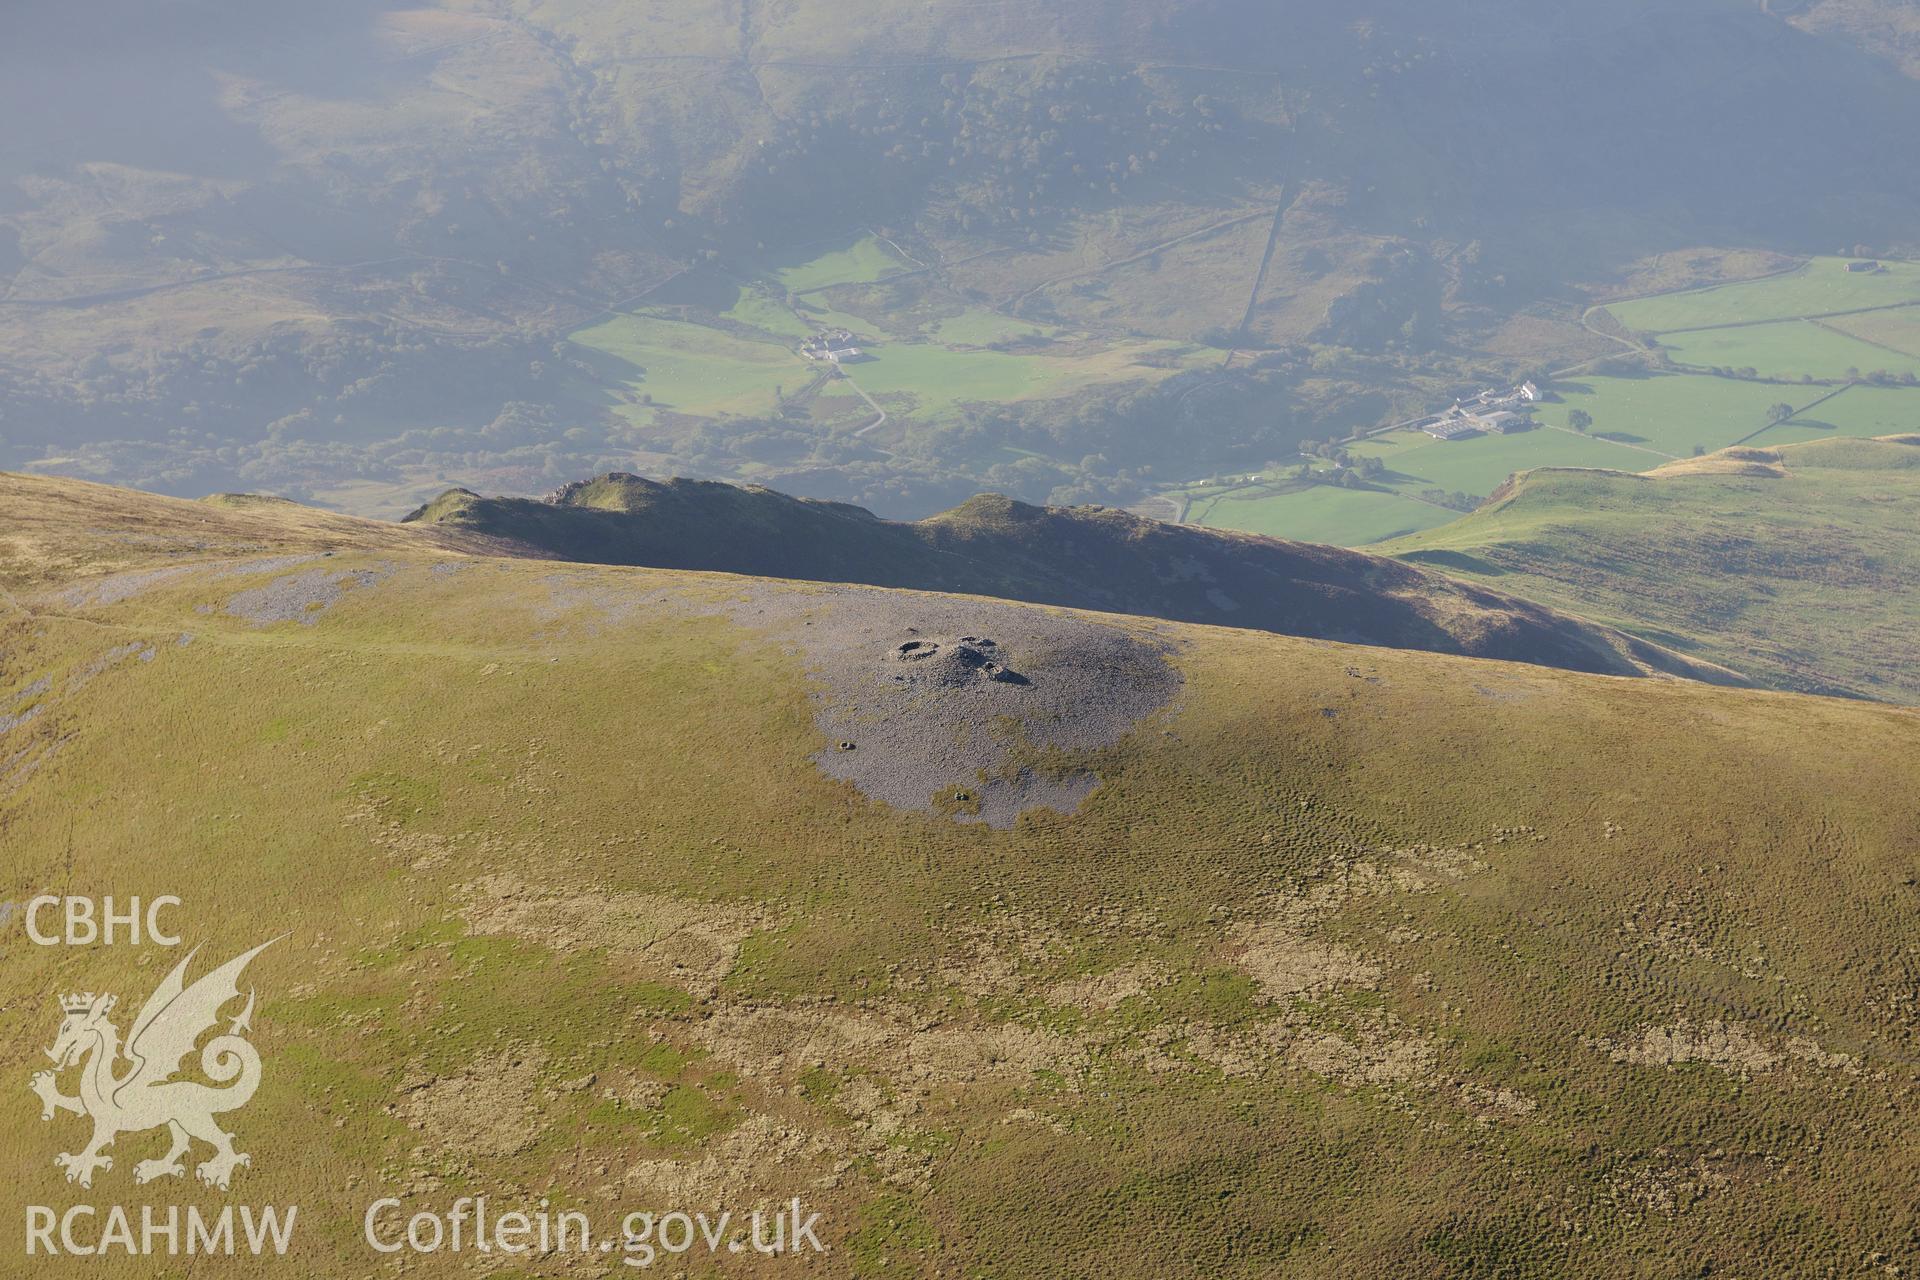 Mynydd Mawr cairn near Nantlle. Oblique aerial photograph taken during the Royal Commission's programme of archaeological aerial reconnaissance by Toby Driver on 2nd October 2015.